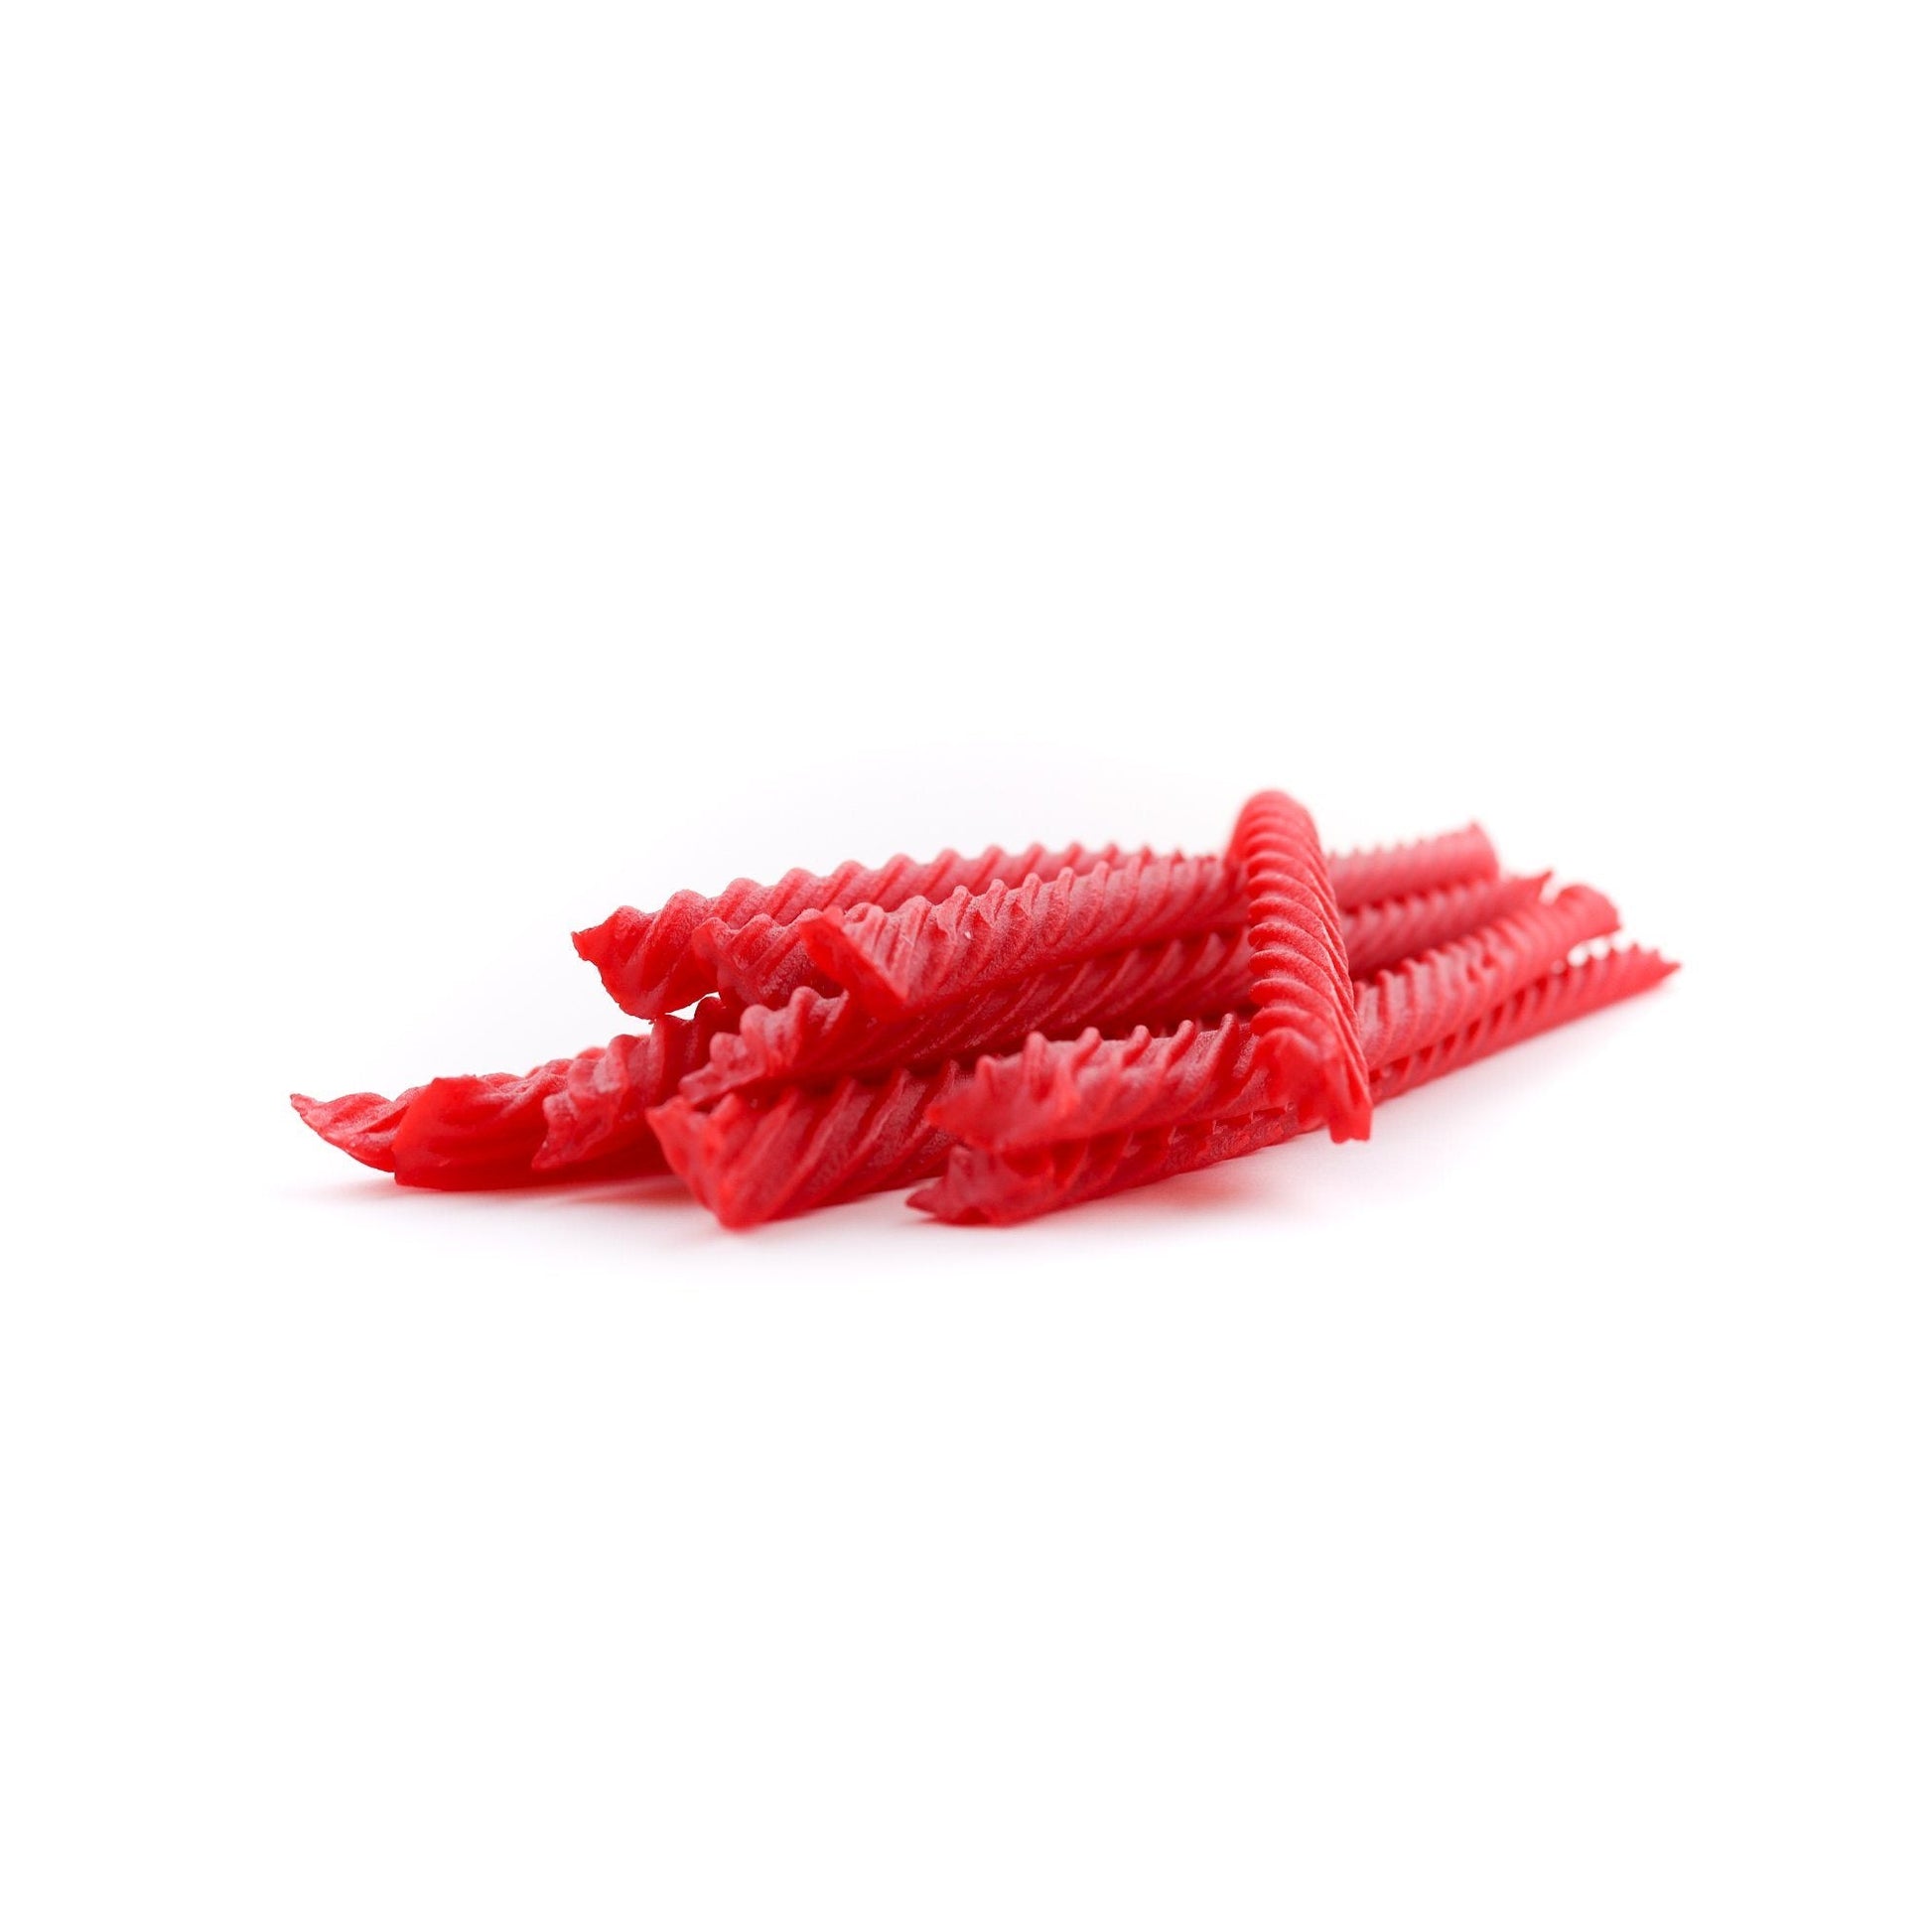 Original Red Chewy Licorice Twists in a pile